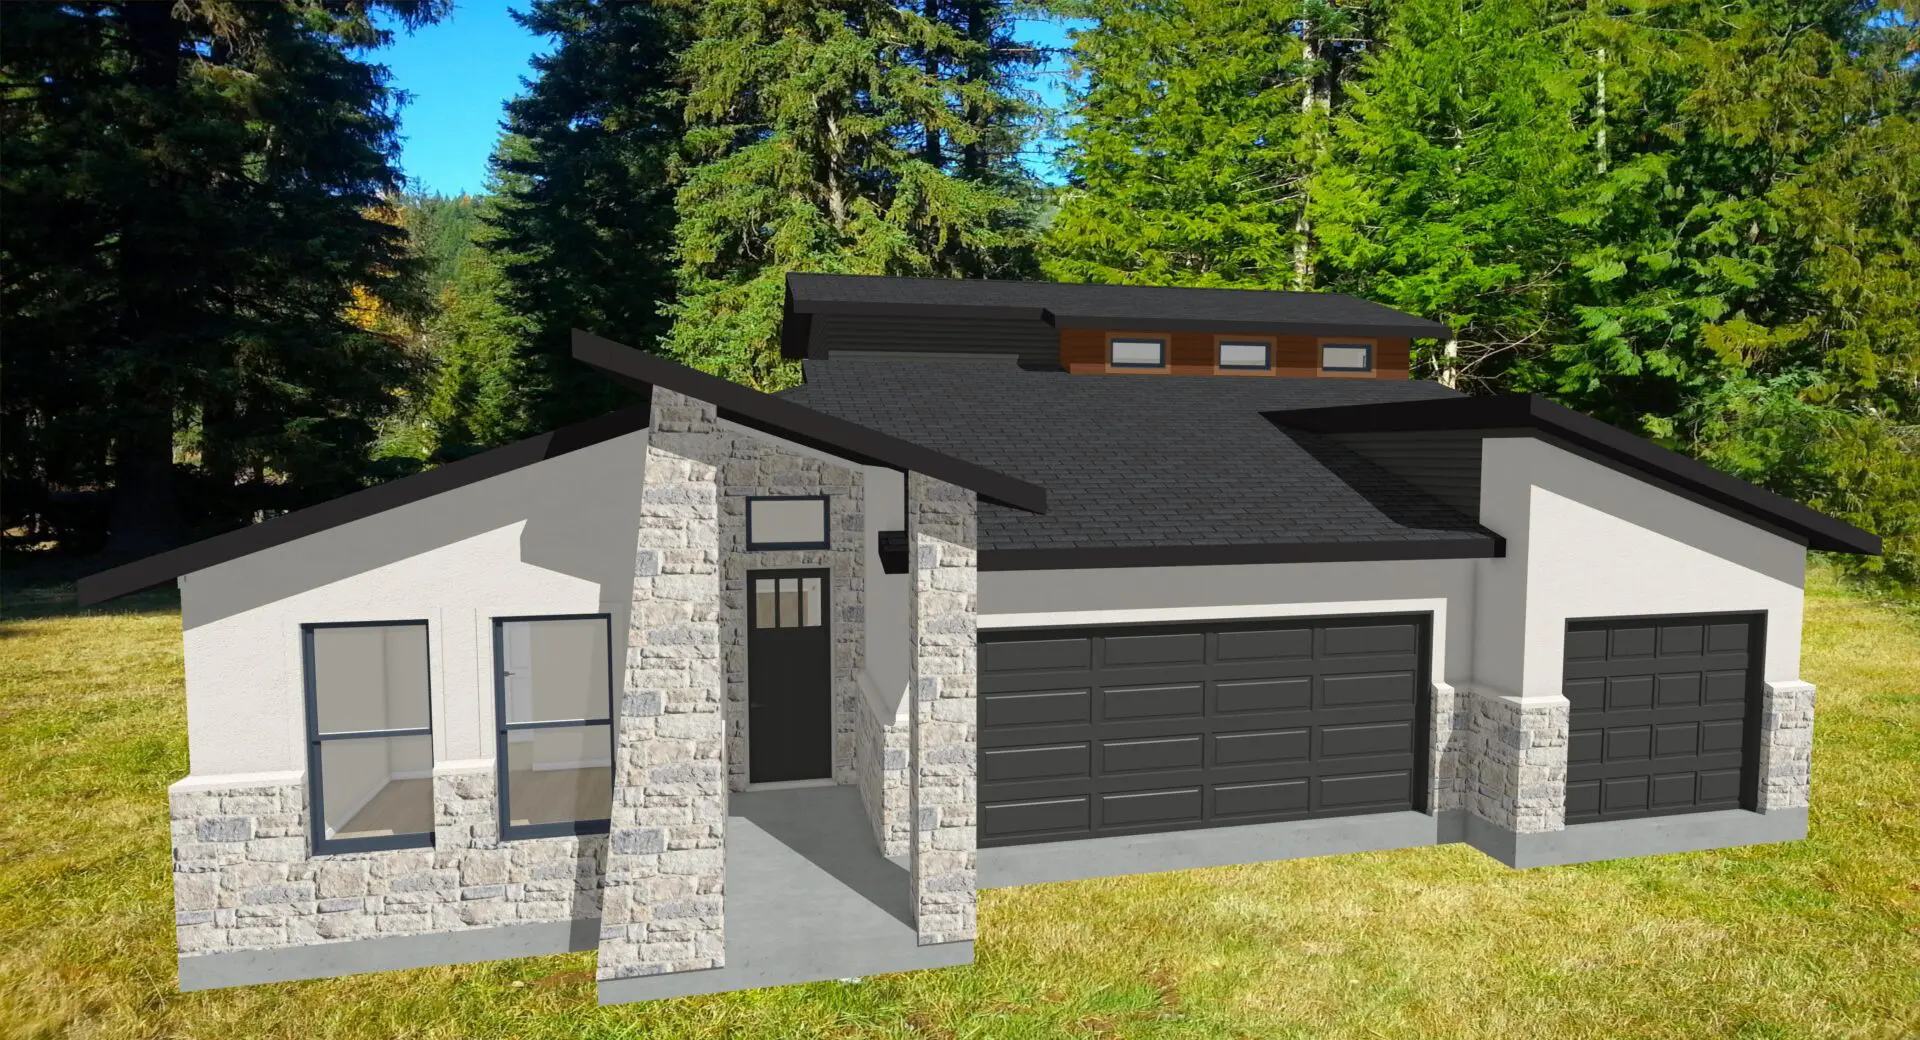 A 3d rendering of a house with a garage.